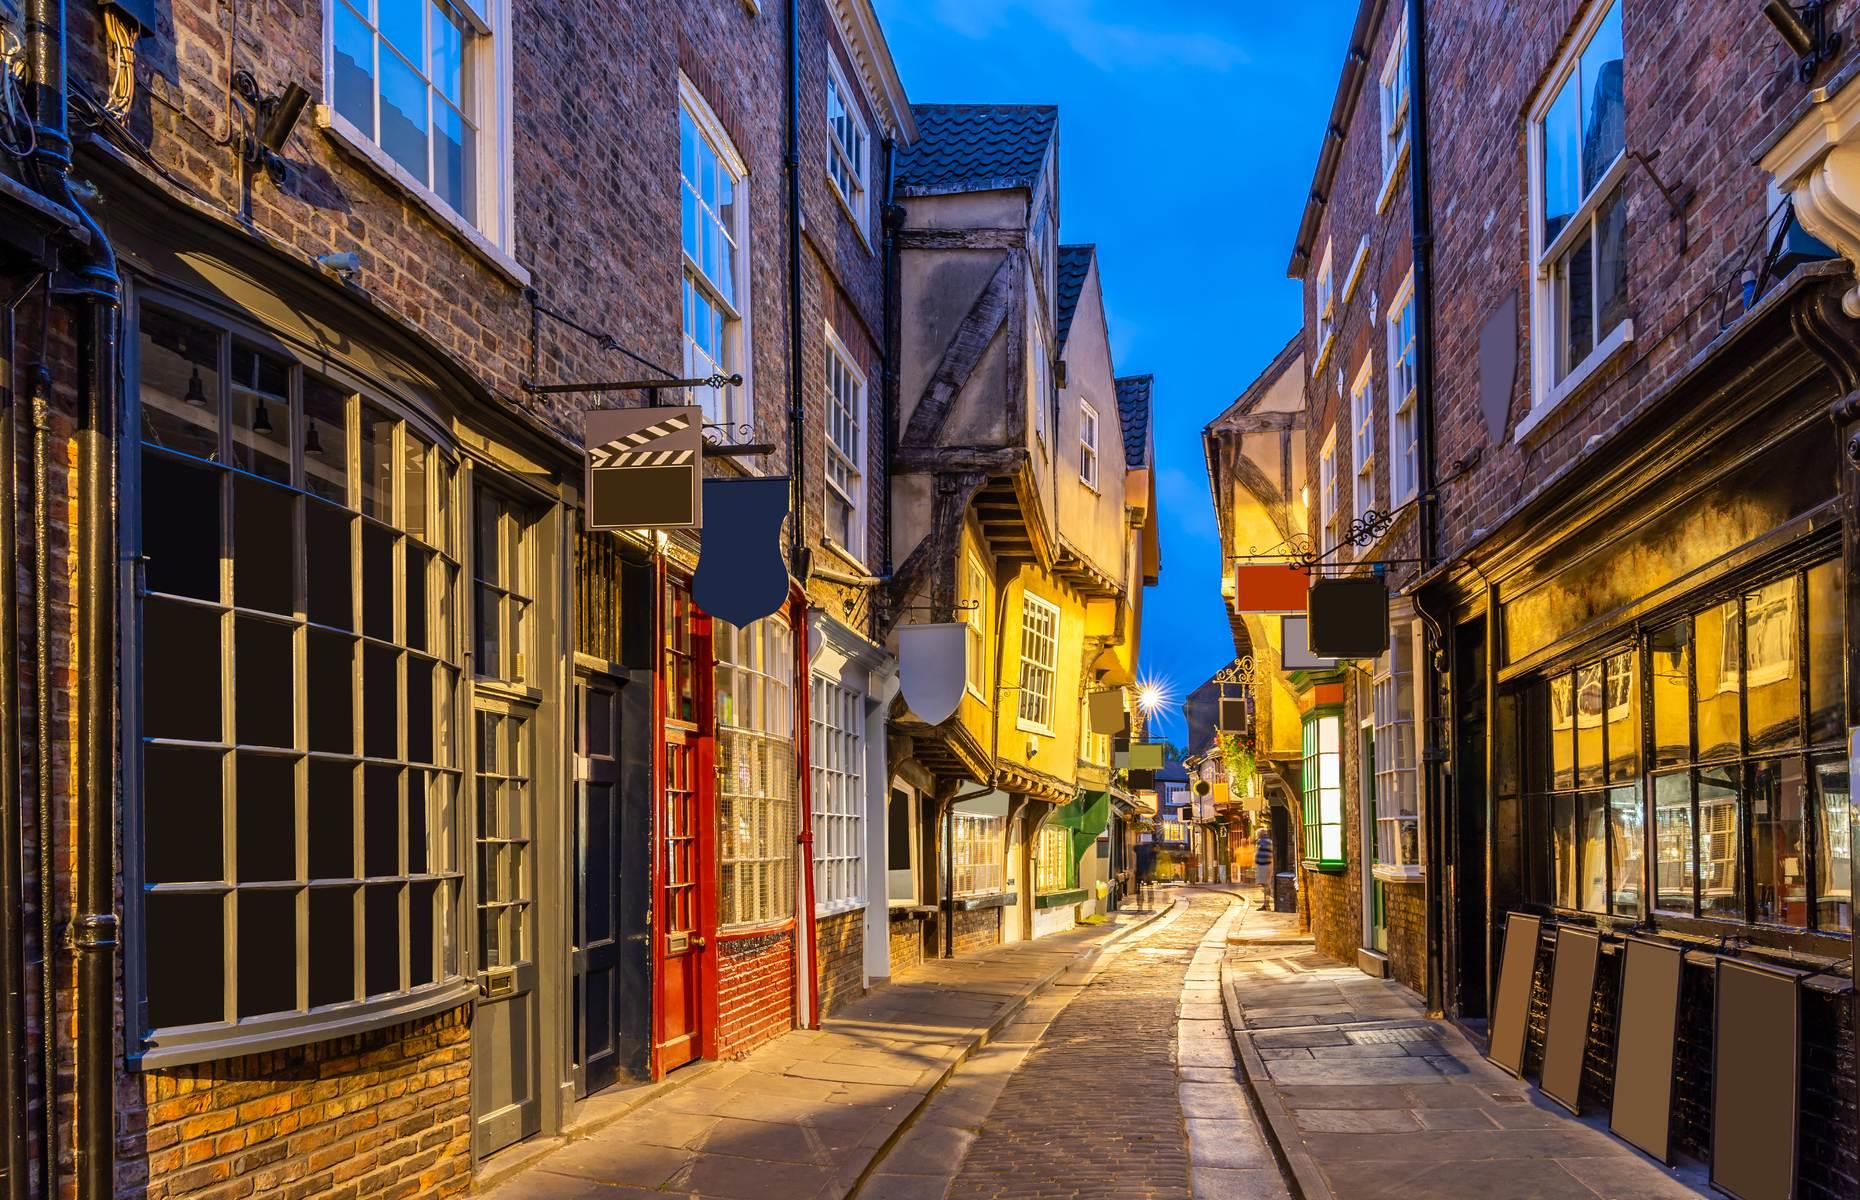 <p>Although it dates back to Roman times, York flourished during the Middle Ages. The city built its wealth on trading in wool and textiles, and society's most affluent people invested in property such as the cottages of Our Lady’s Row in Goodramgate, dated to 1316. Star sights here include The Shambles<a href="https://xyuandbeyond.com/the-shambles-york/">,</a> a street seemingly straight out of <em>Harry Potter</em>, which takes its name from the butchers' benches, placed outside shops to display wares. York Minster, constructed between 1230 and 1472, is one of the finest examples of Gothic cathedrals in the world too.</p>